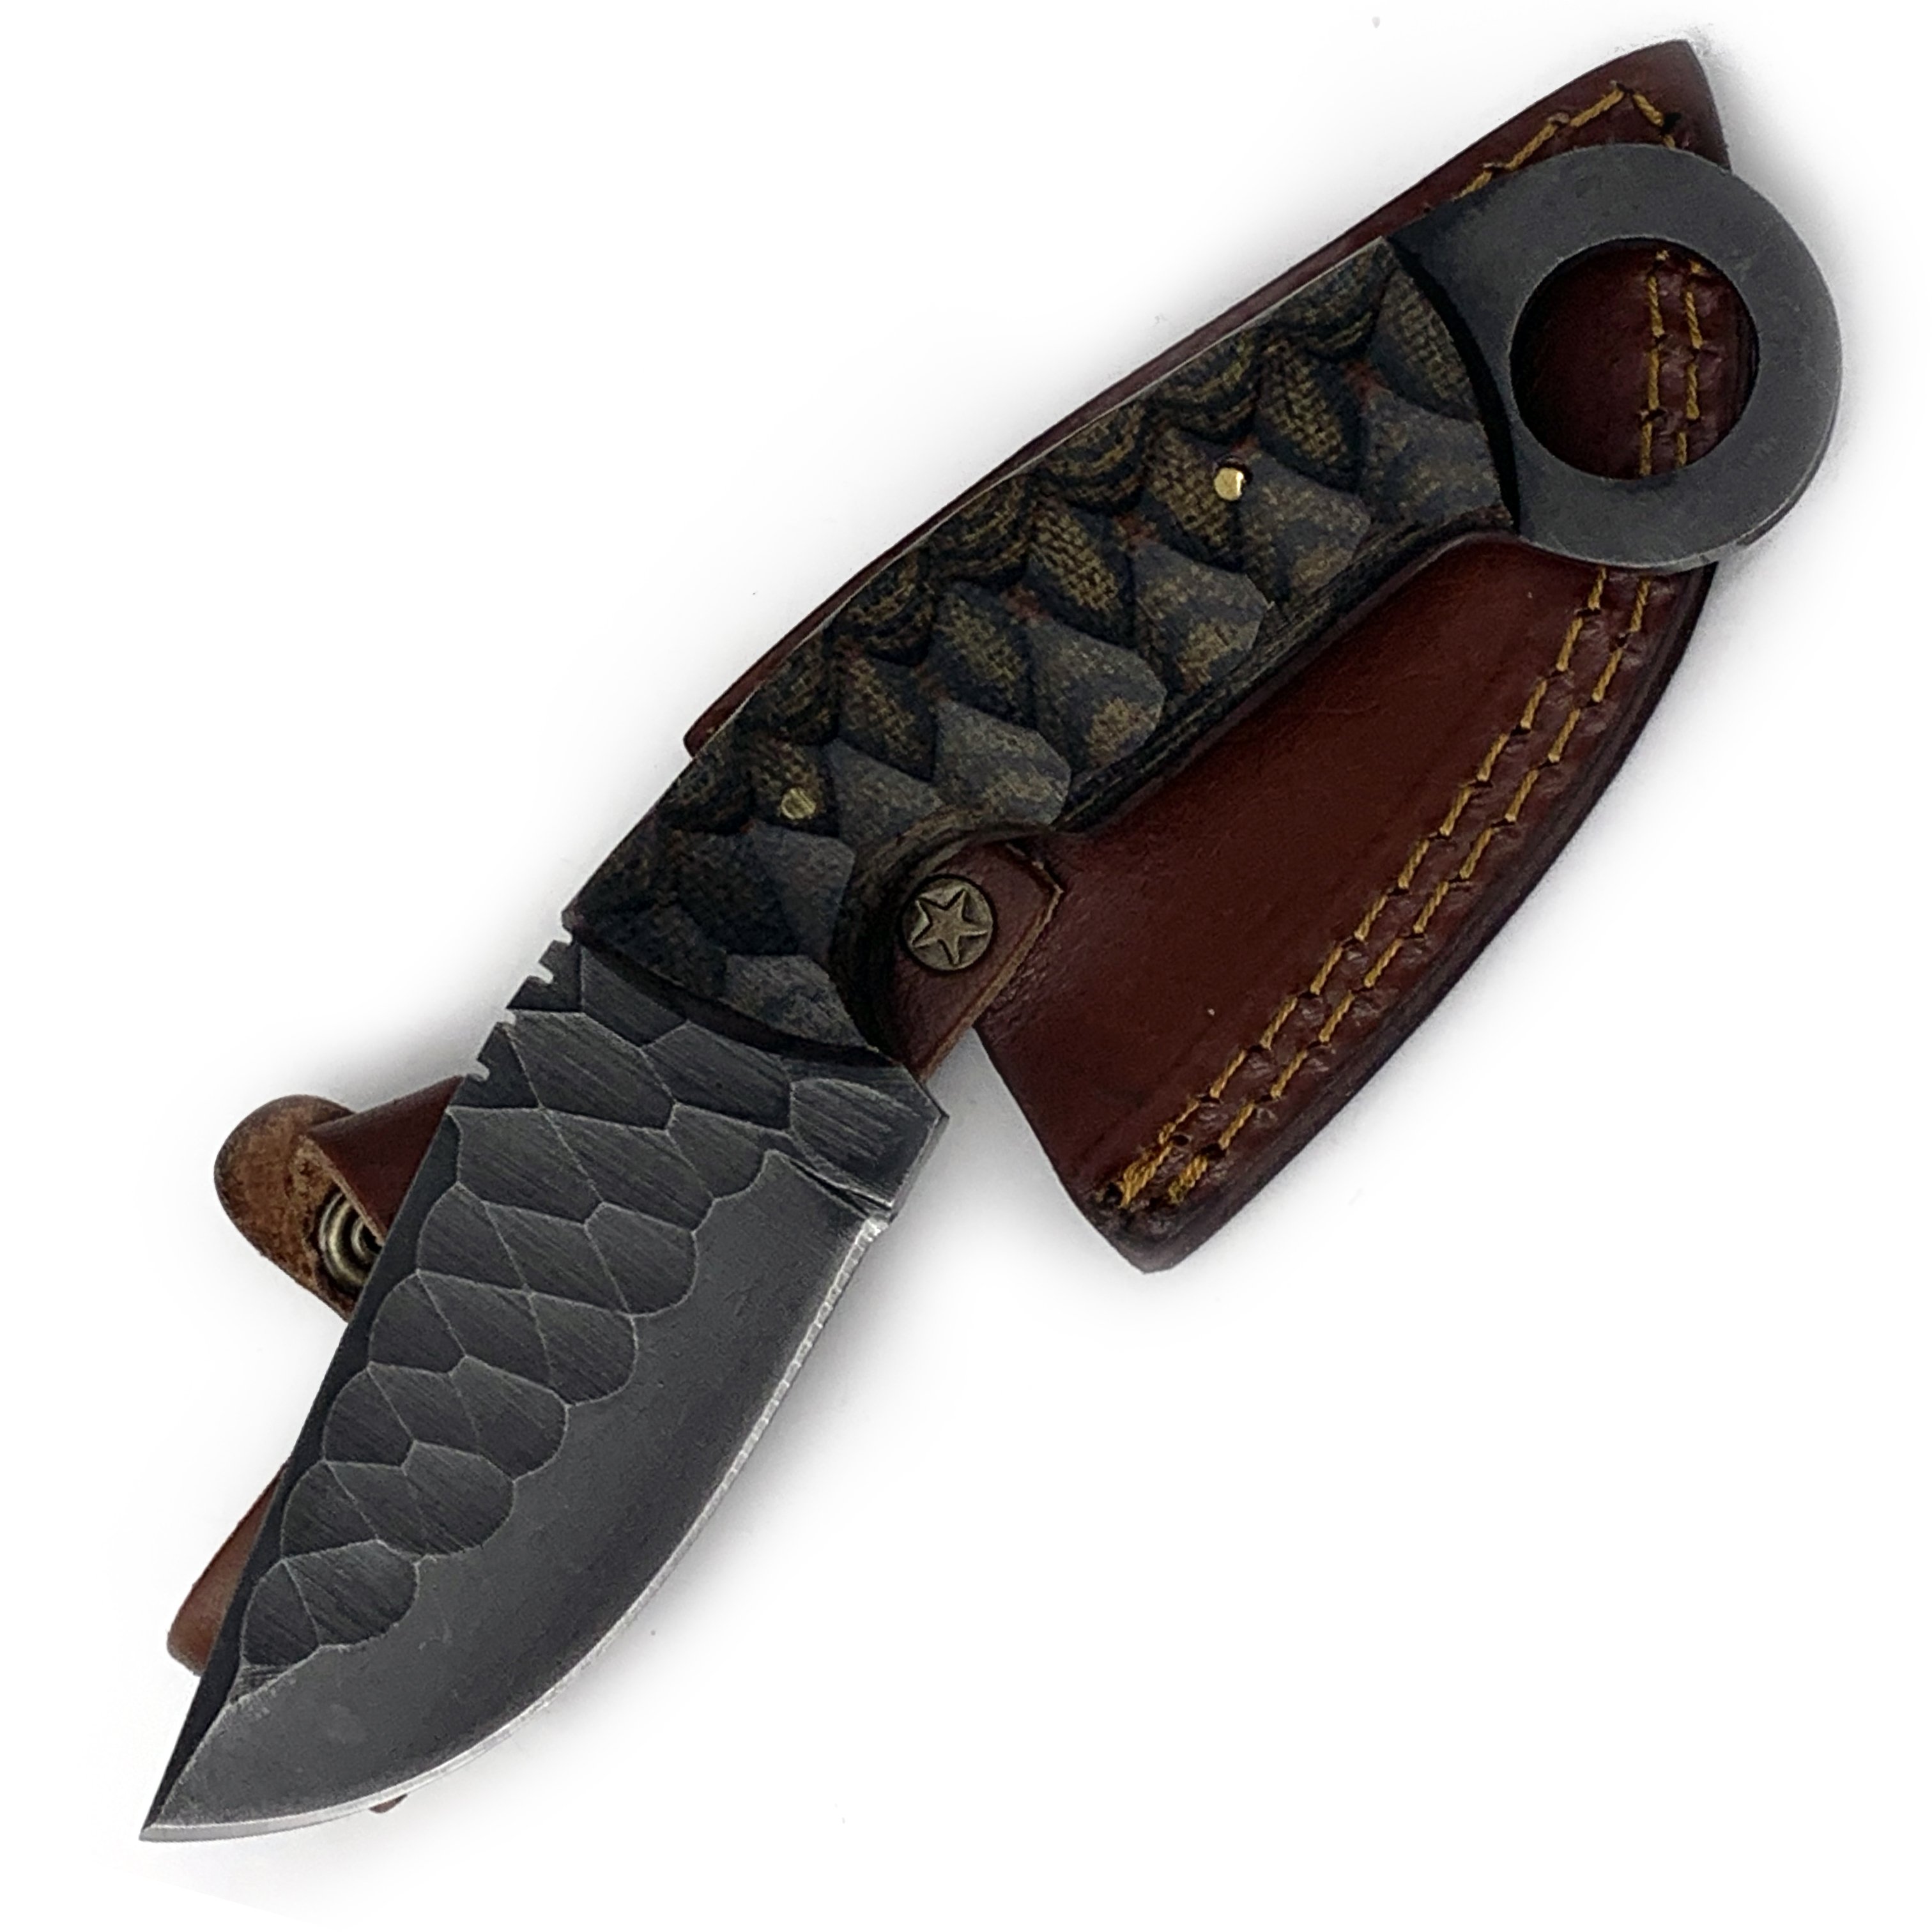 8 Inch 1095 High Carbon Steel Semi Karambit Knife W leather Case (Hand Made) Brown